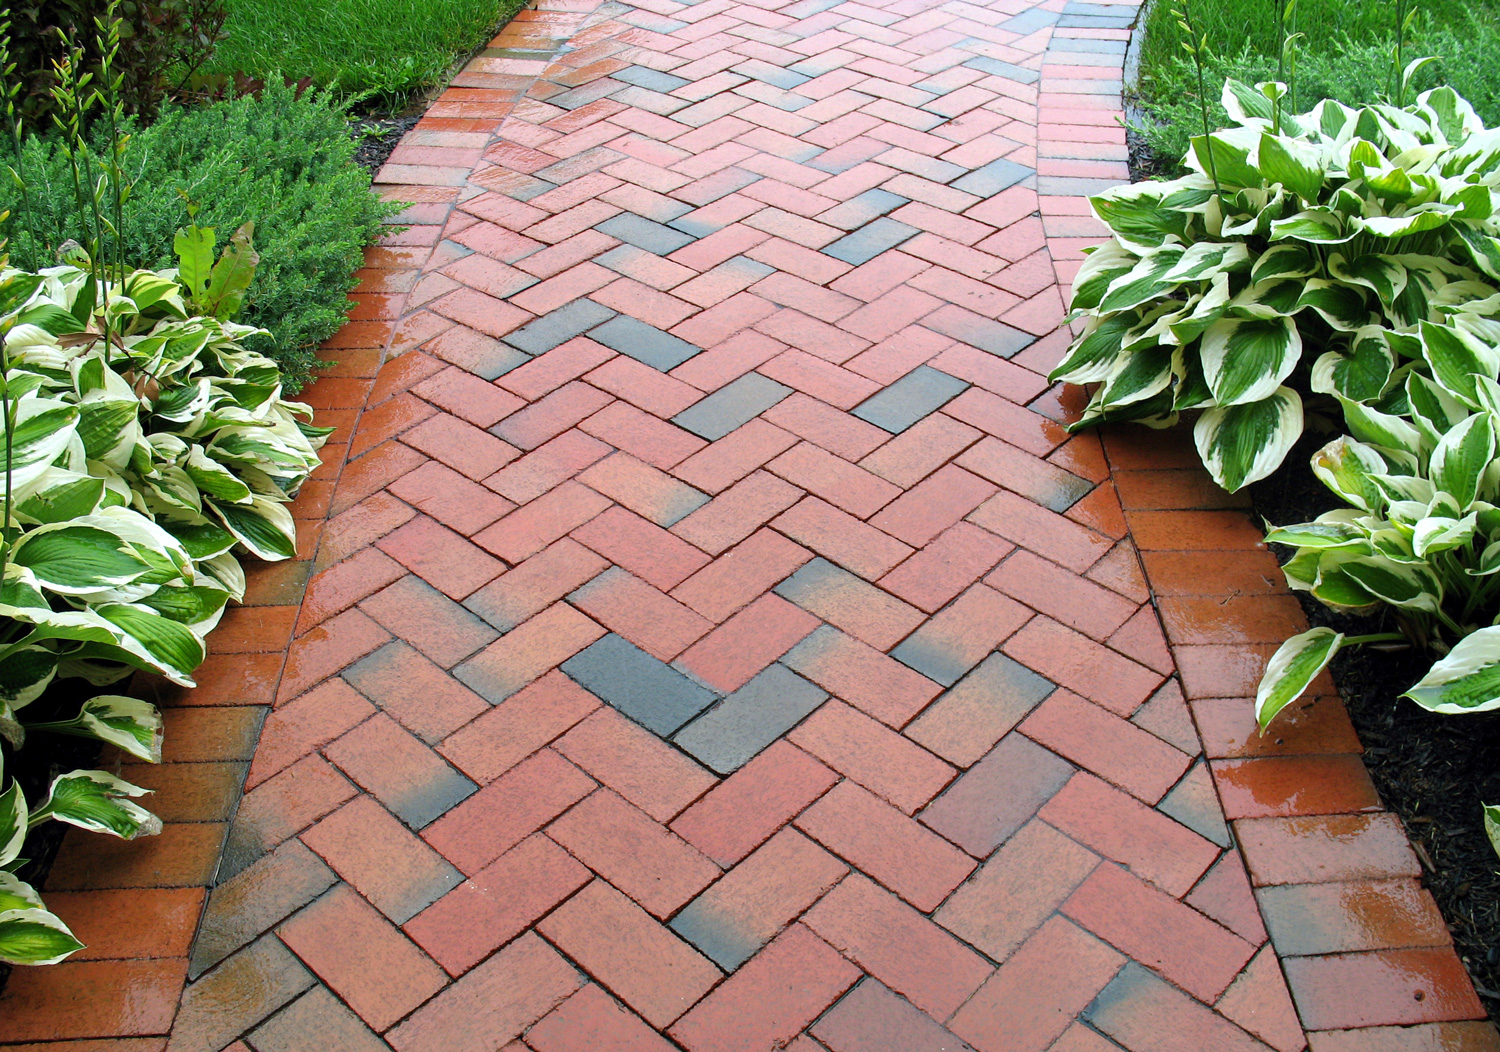 This picture of a red brick sidewalk may be used as a background image in topics related to landscaping, bricks, geometric patterns, masonry, bricklaying, etc. 